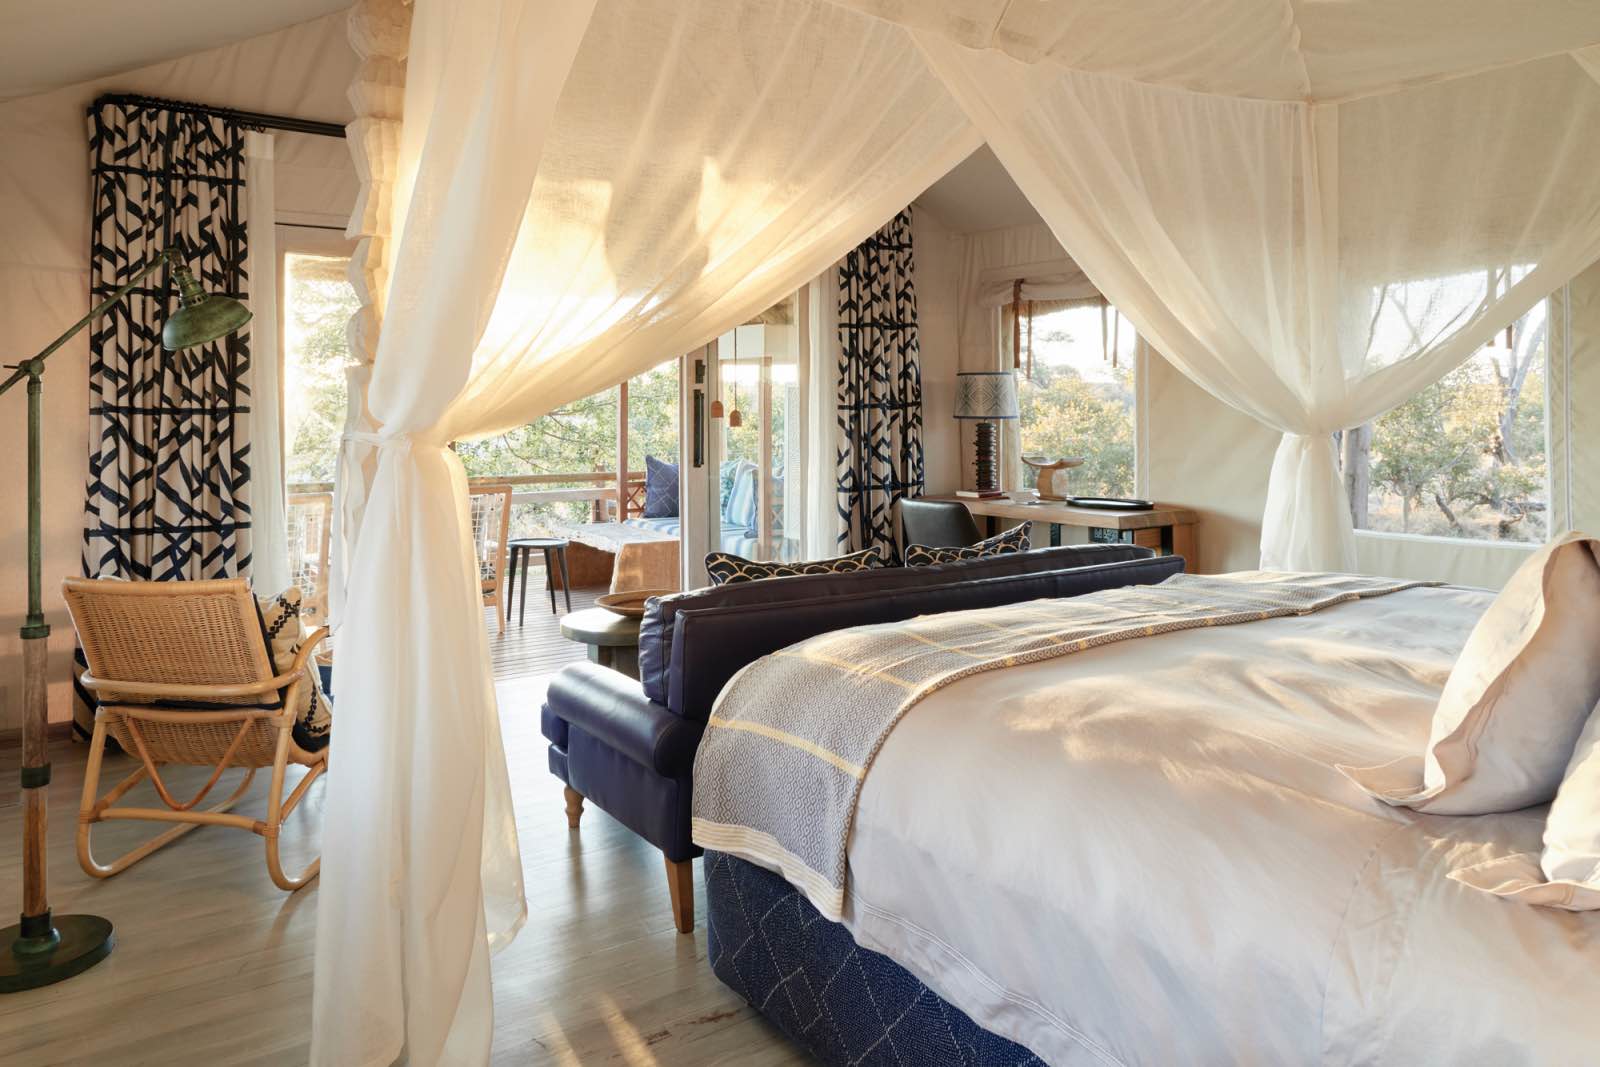 Inside the luxurious rooms at Savute Elephant Lodge